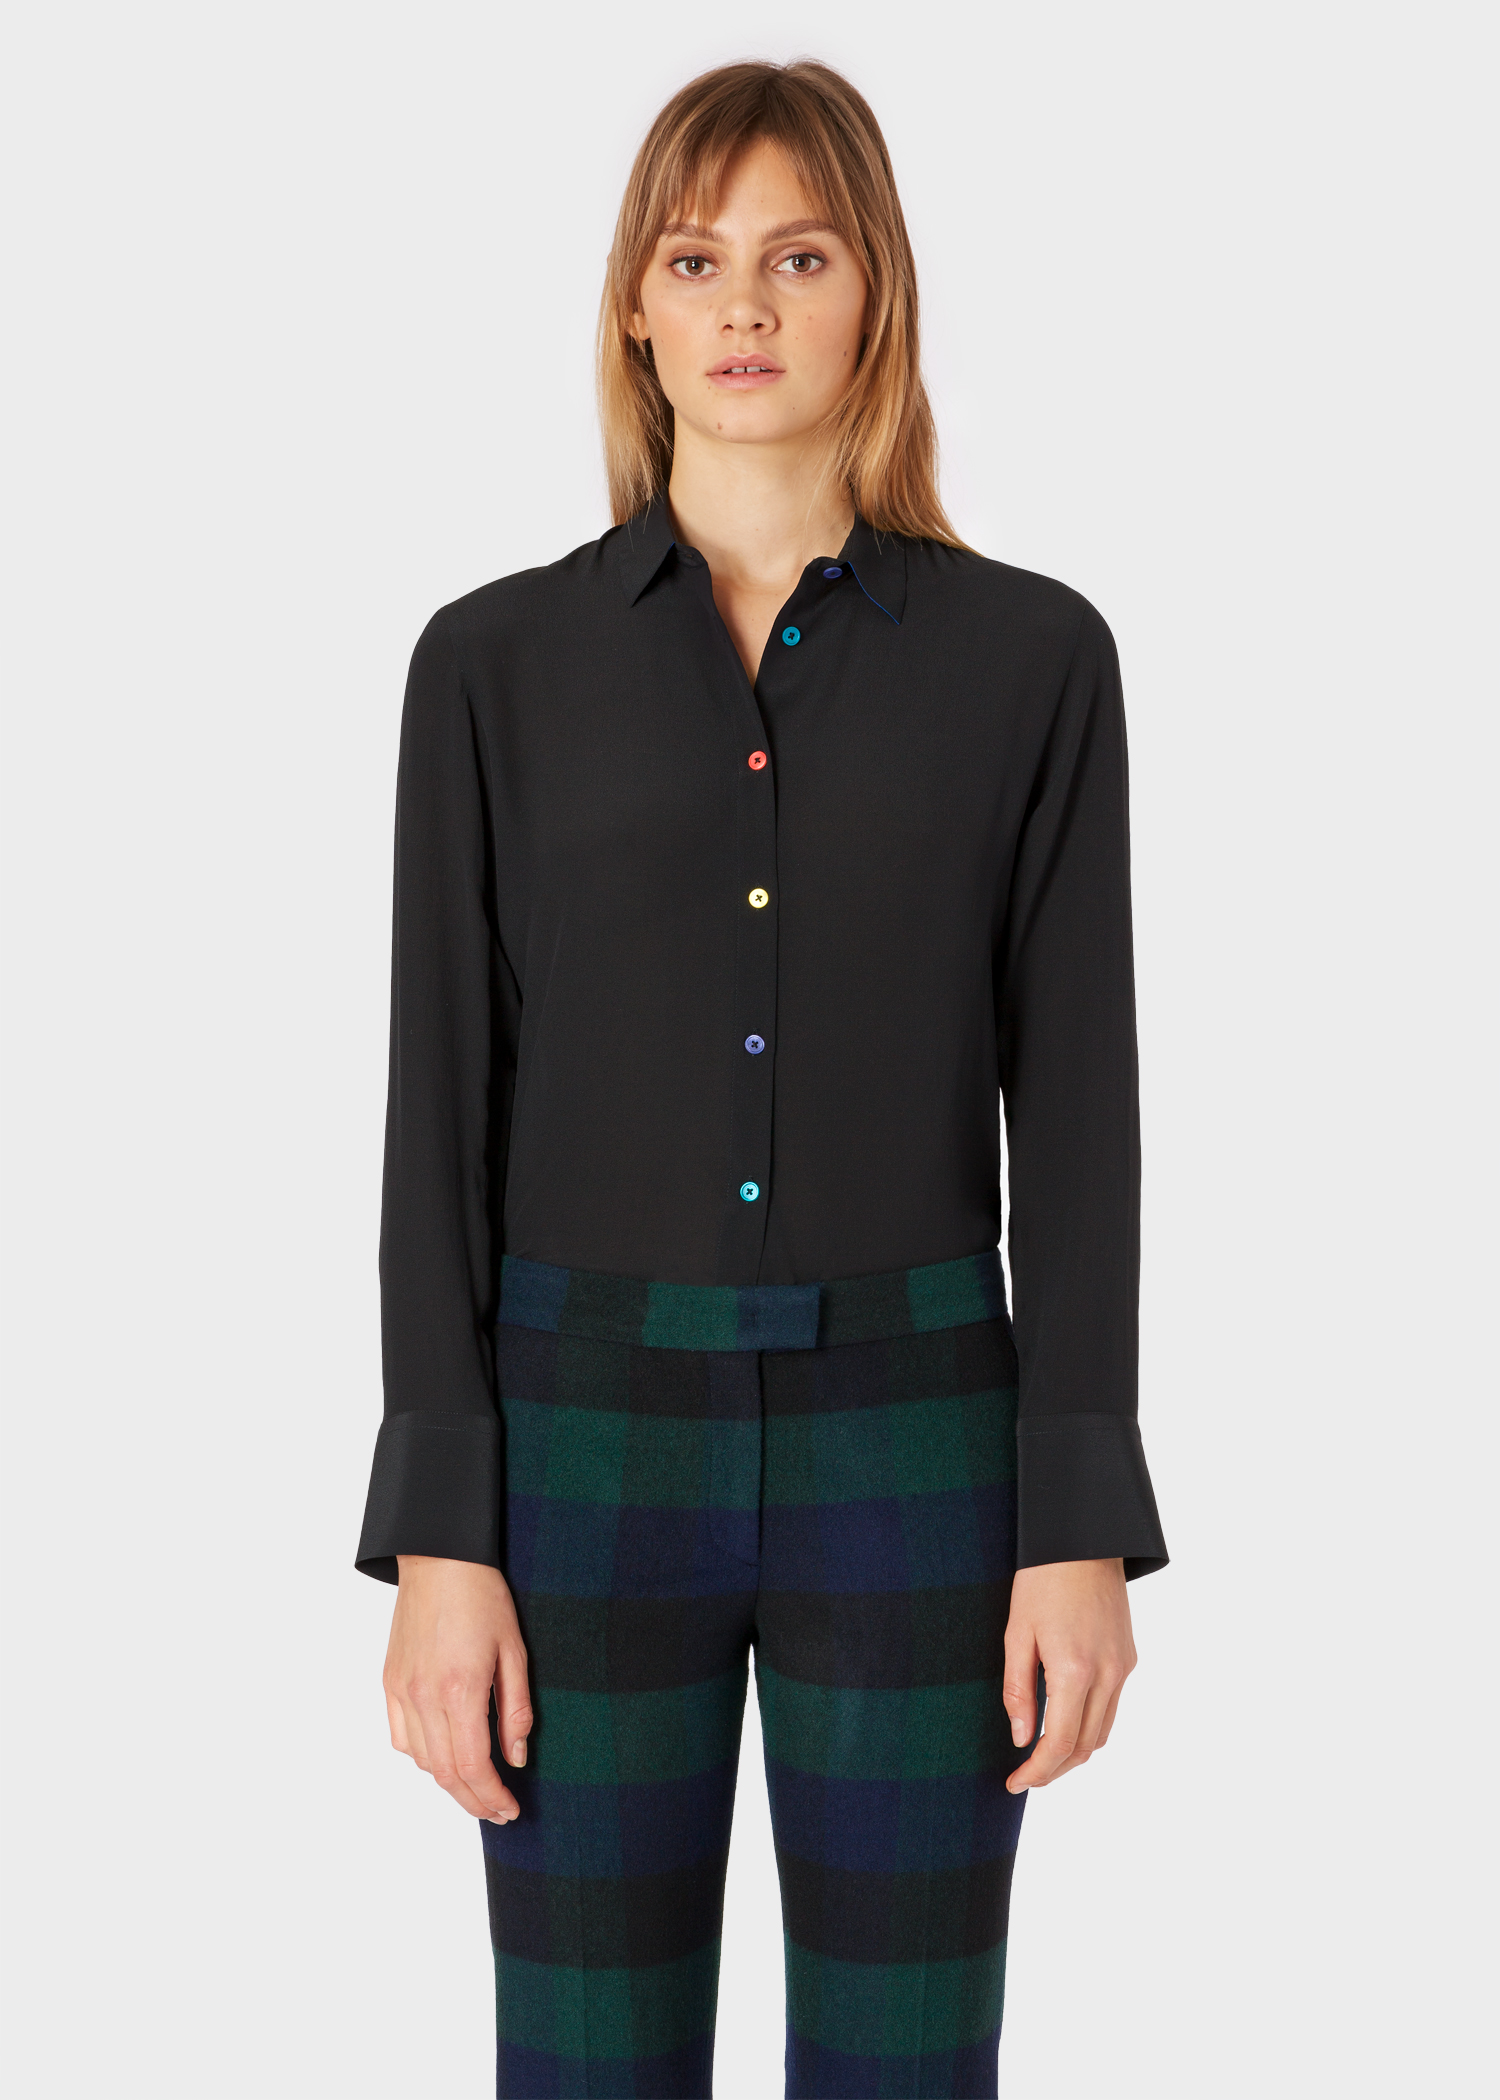 Model front close up - Women's Black Silk Shirt With Multi-Coloured Button Placket Paul Smith